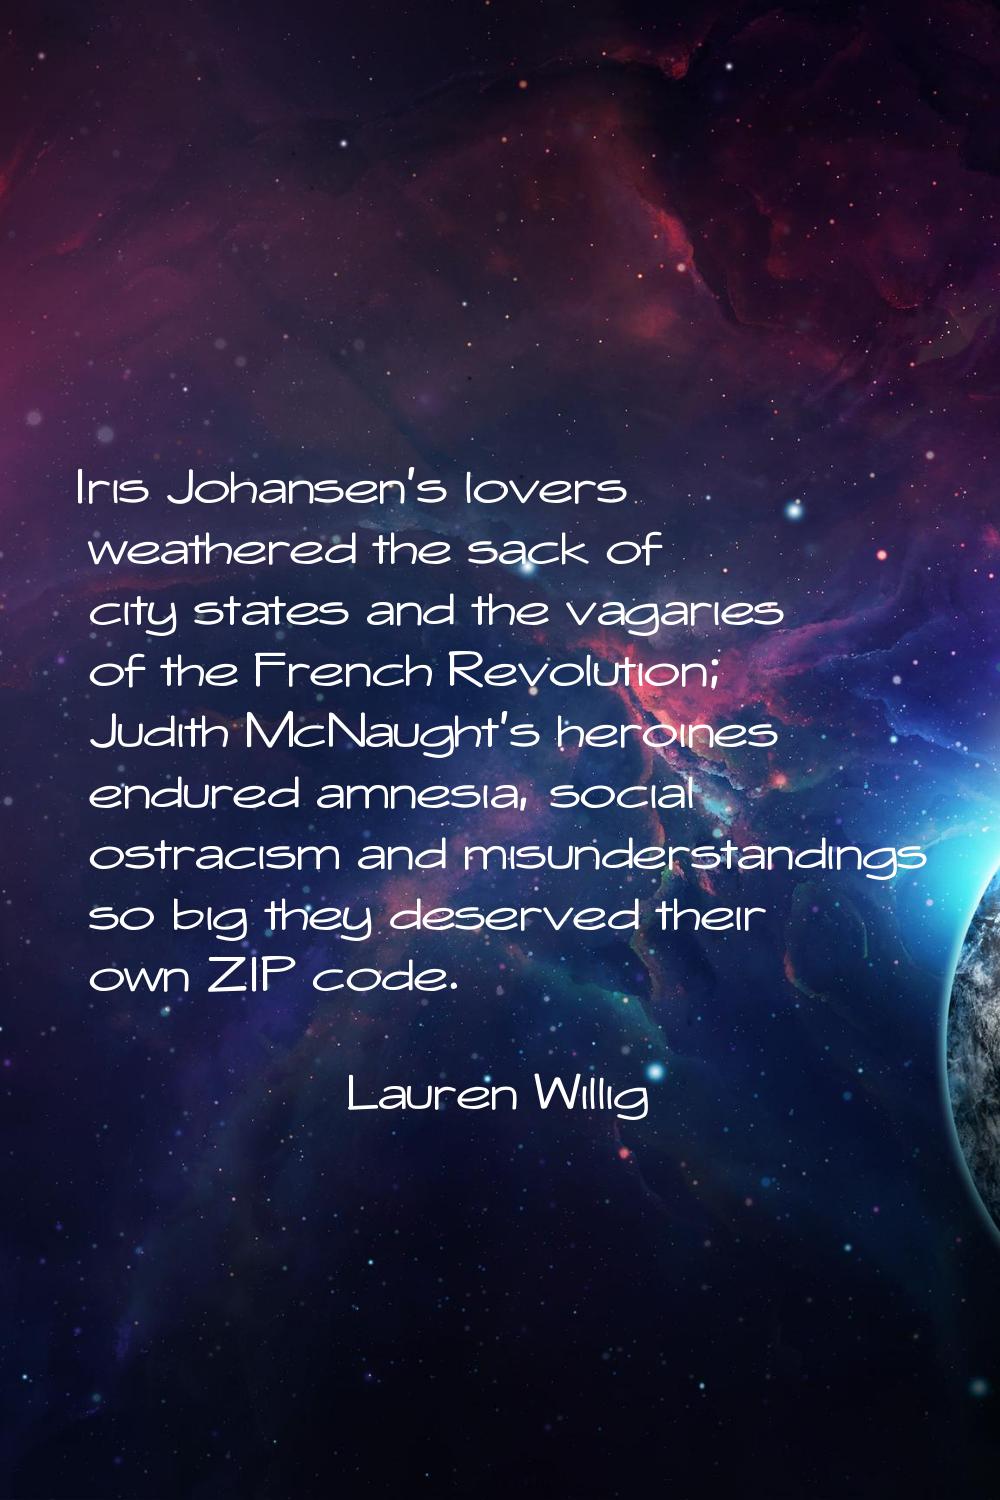 Iris Johansen's lovers weathered the sack of city states and the vagaries of the French Revolution;